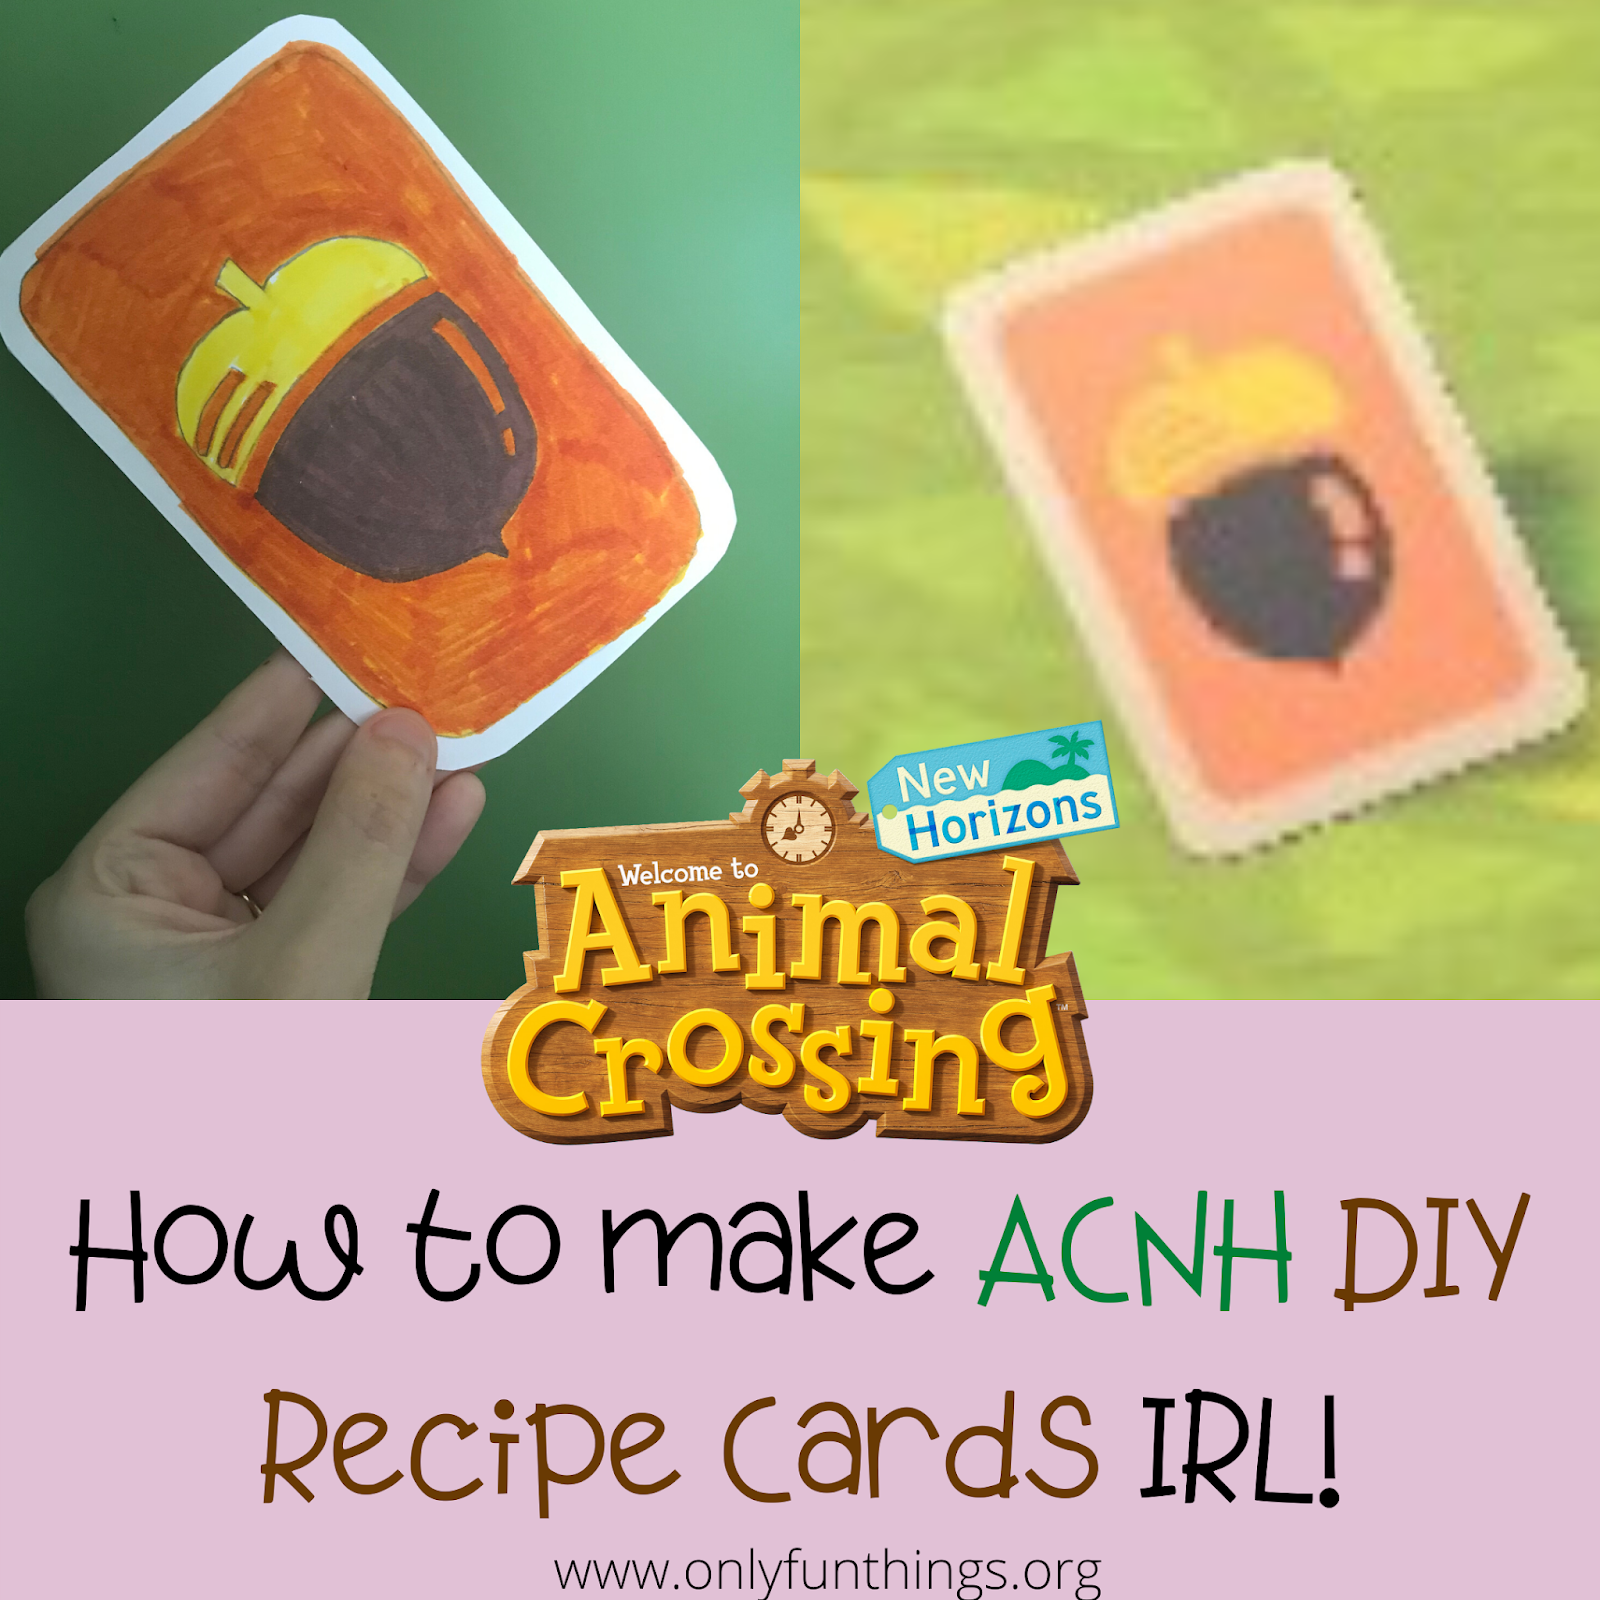 How to Make Animal Crossing New Horizons DIY Recipe Cards IRL!